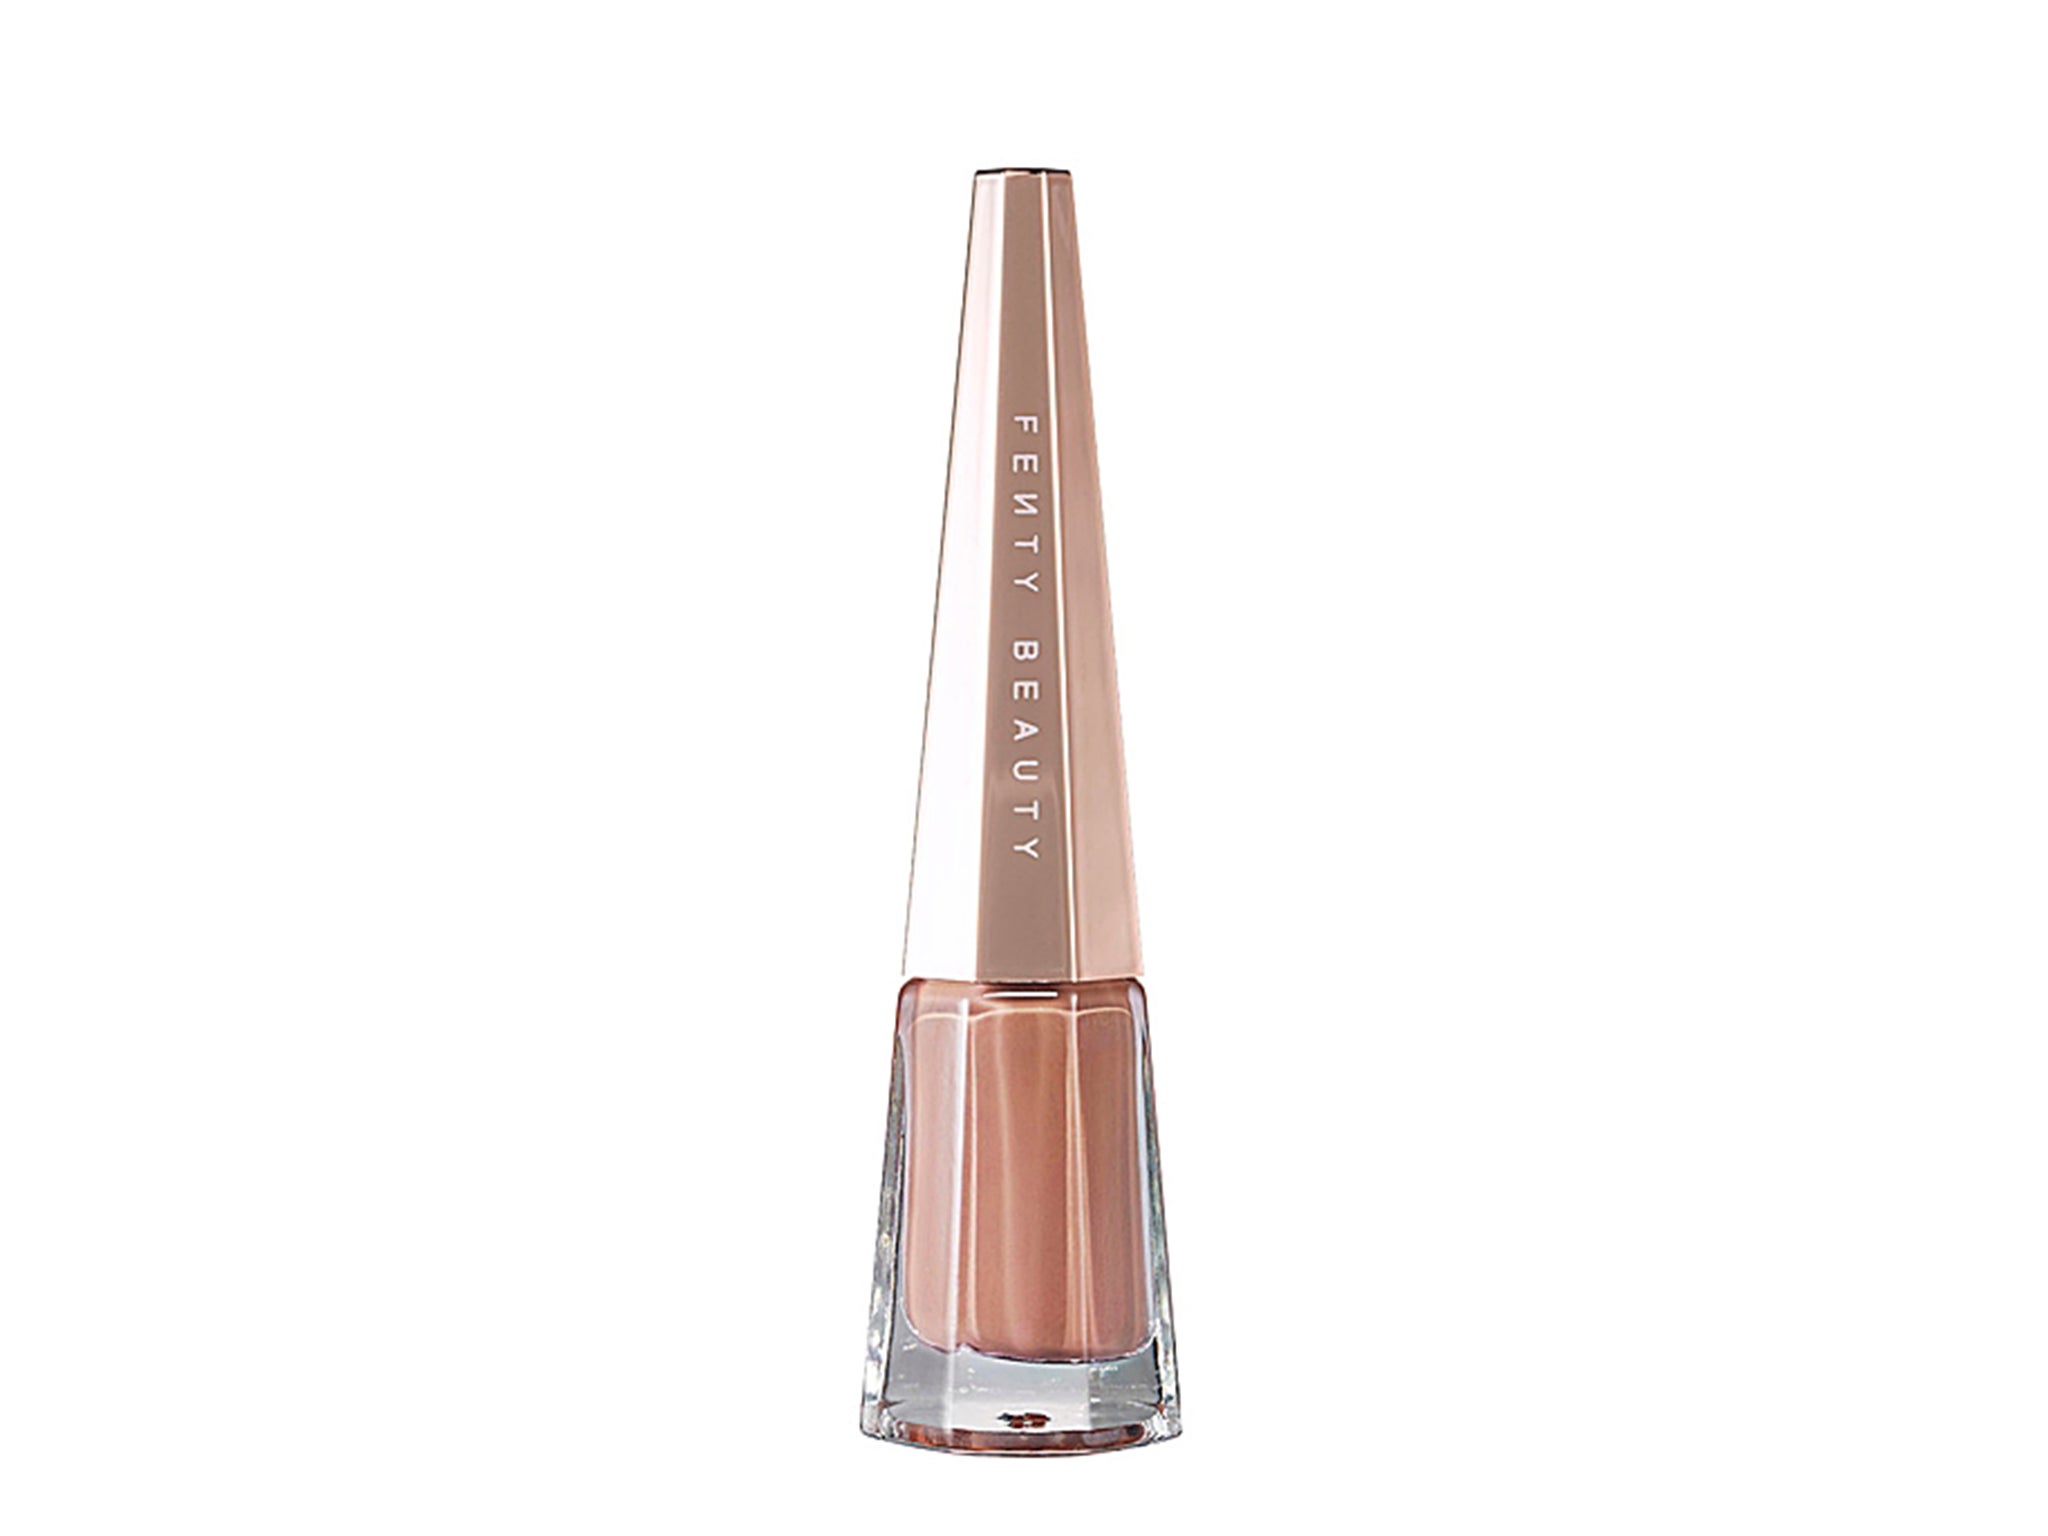 Rihanna has perfected this matte, non-drying formula that's our go-to nude shade